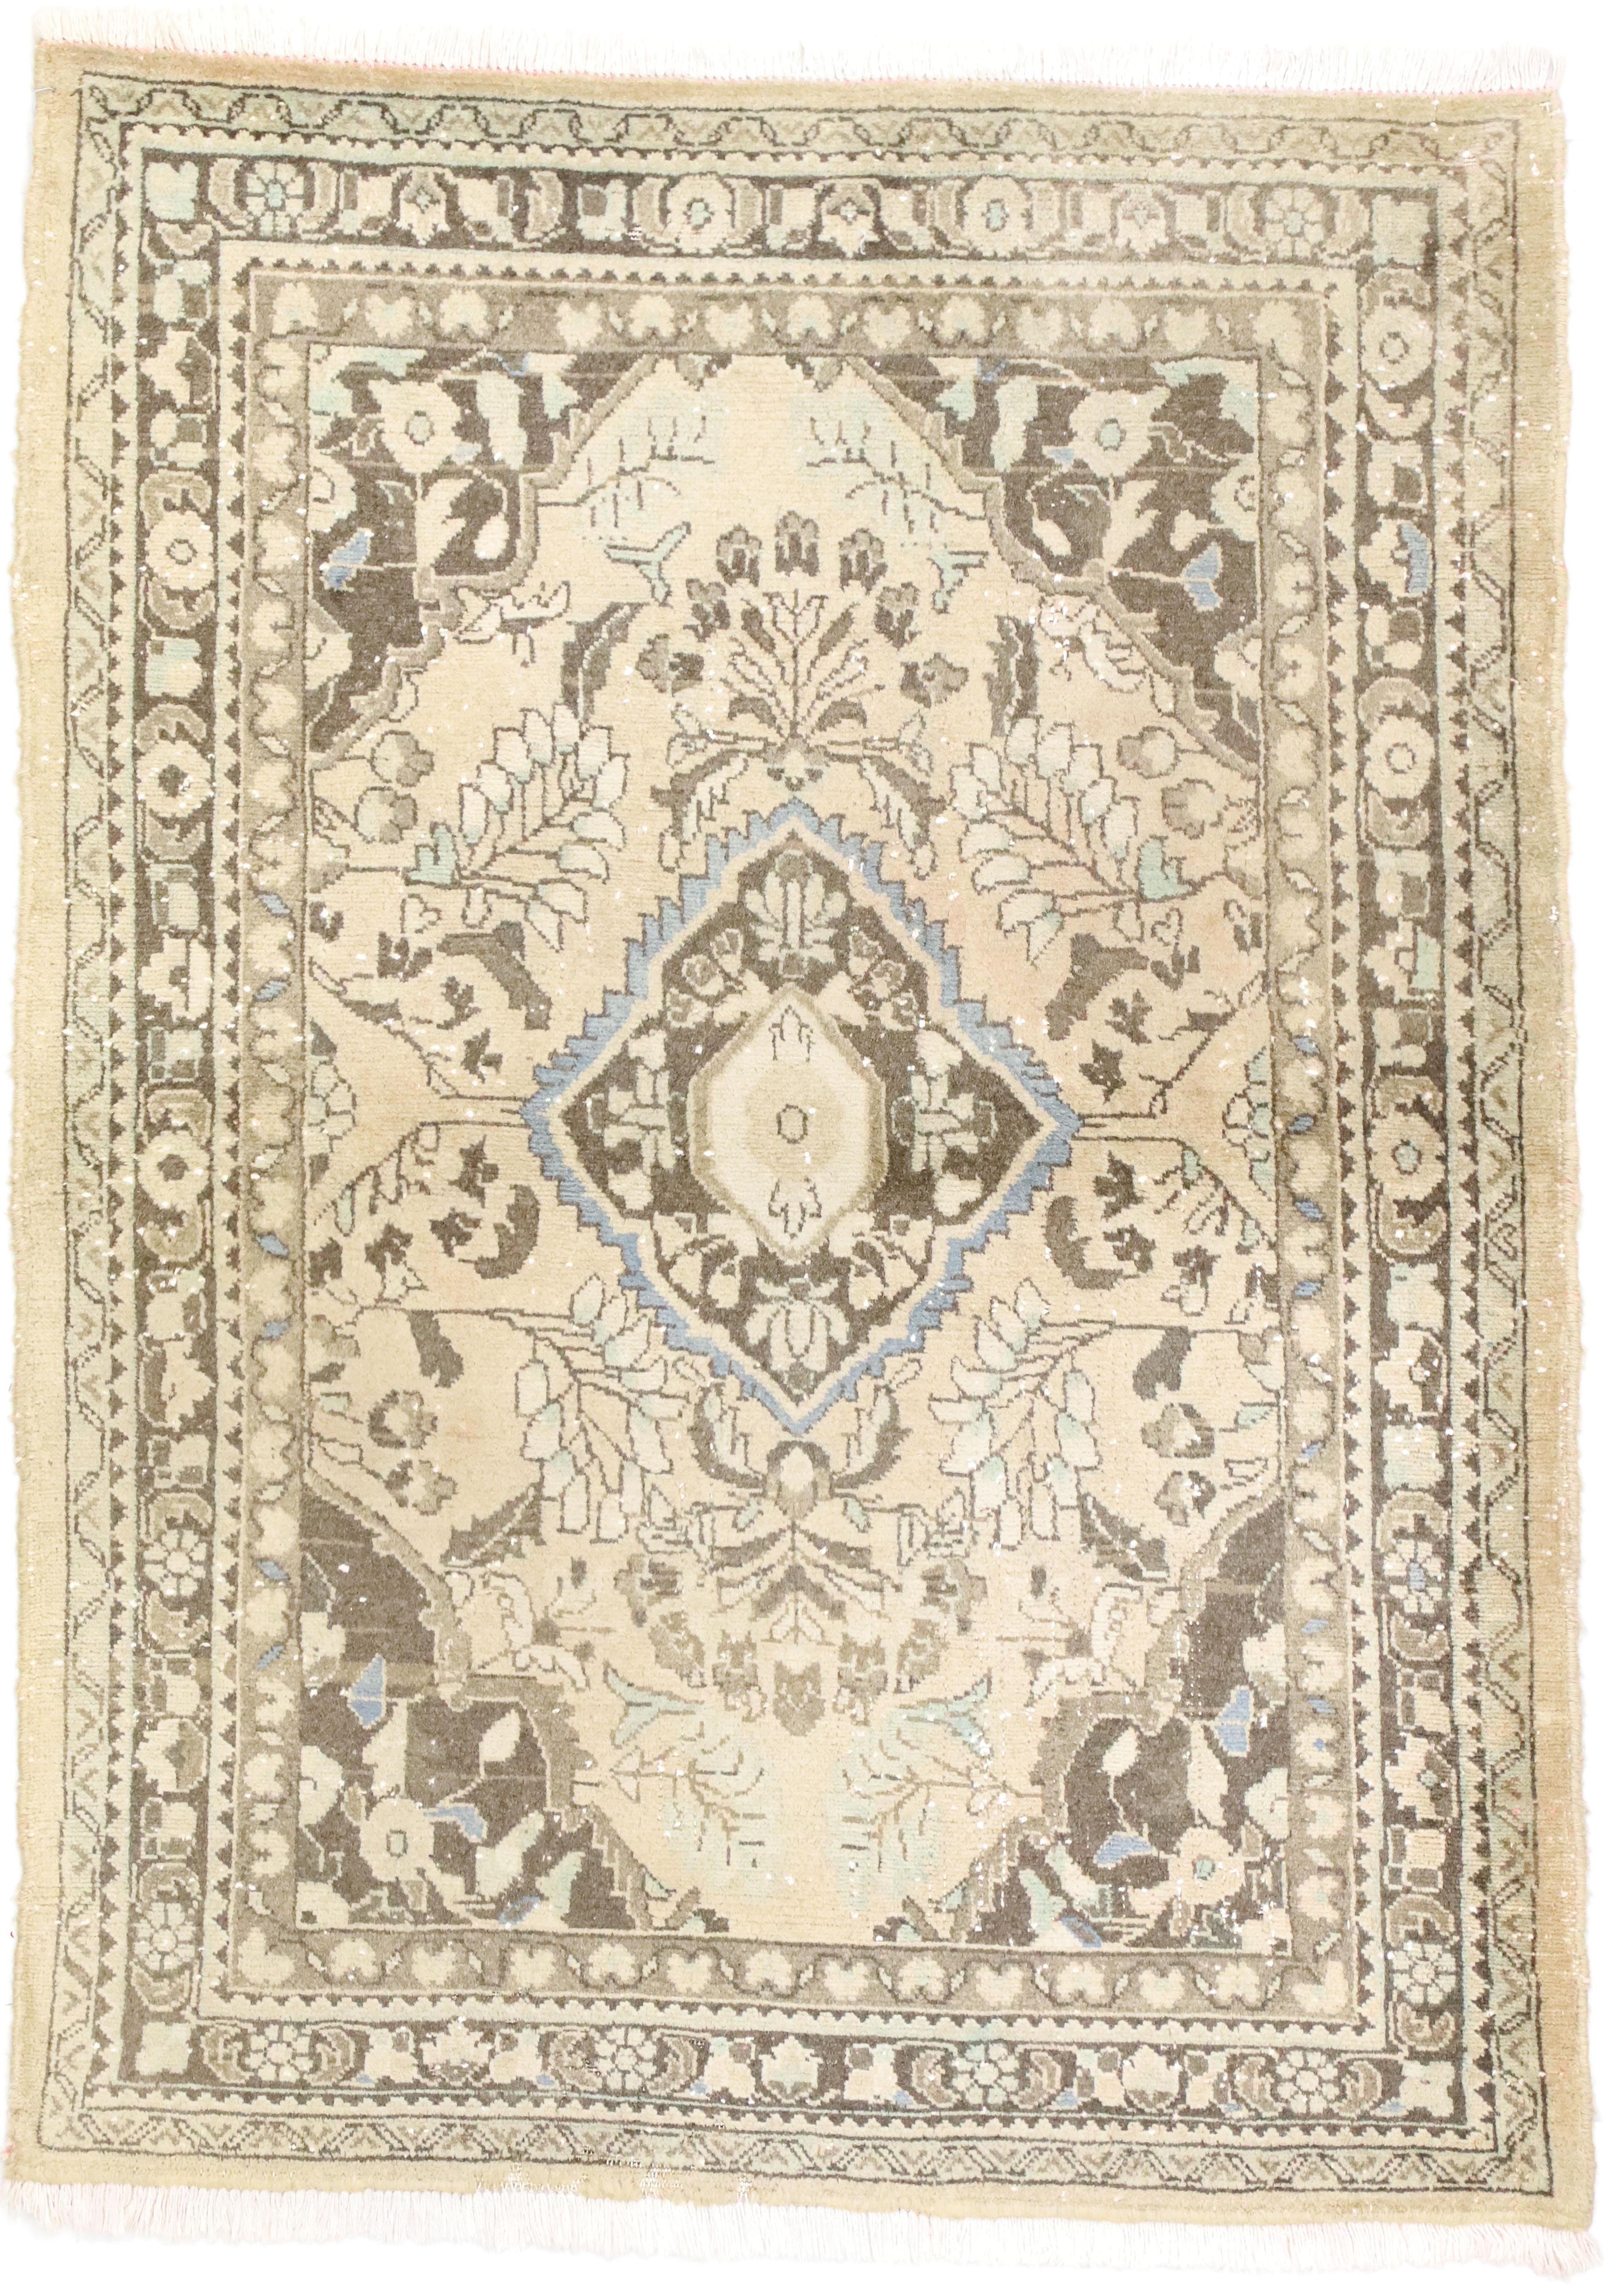 60270 Distressed Vintage Persian Hamadan Accent Rug with Romantic French Regence Style 03’09 x 05’03. Refined glamour and neutral colors meet romantic French Regence style in this hand knotted wool vintage Persian Hamadan accent rug creating a sense